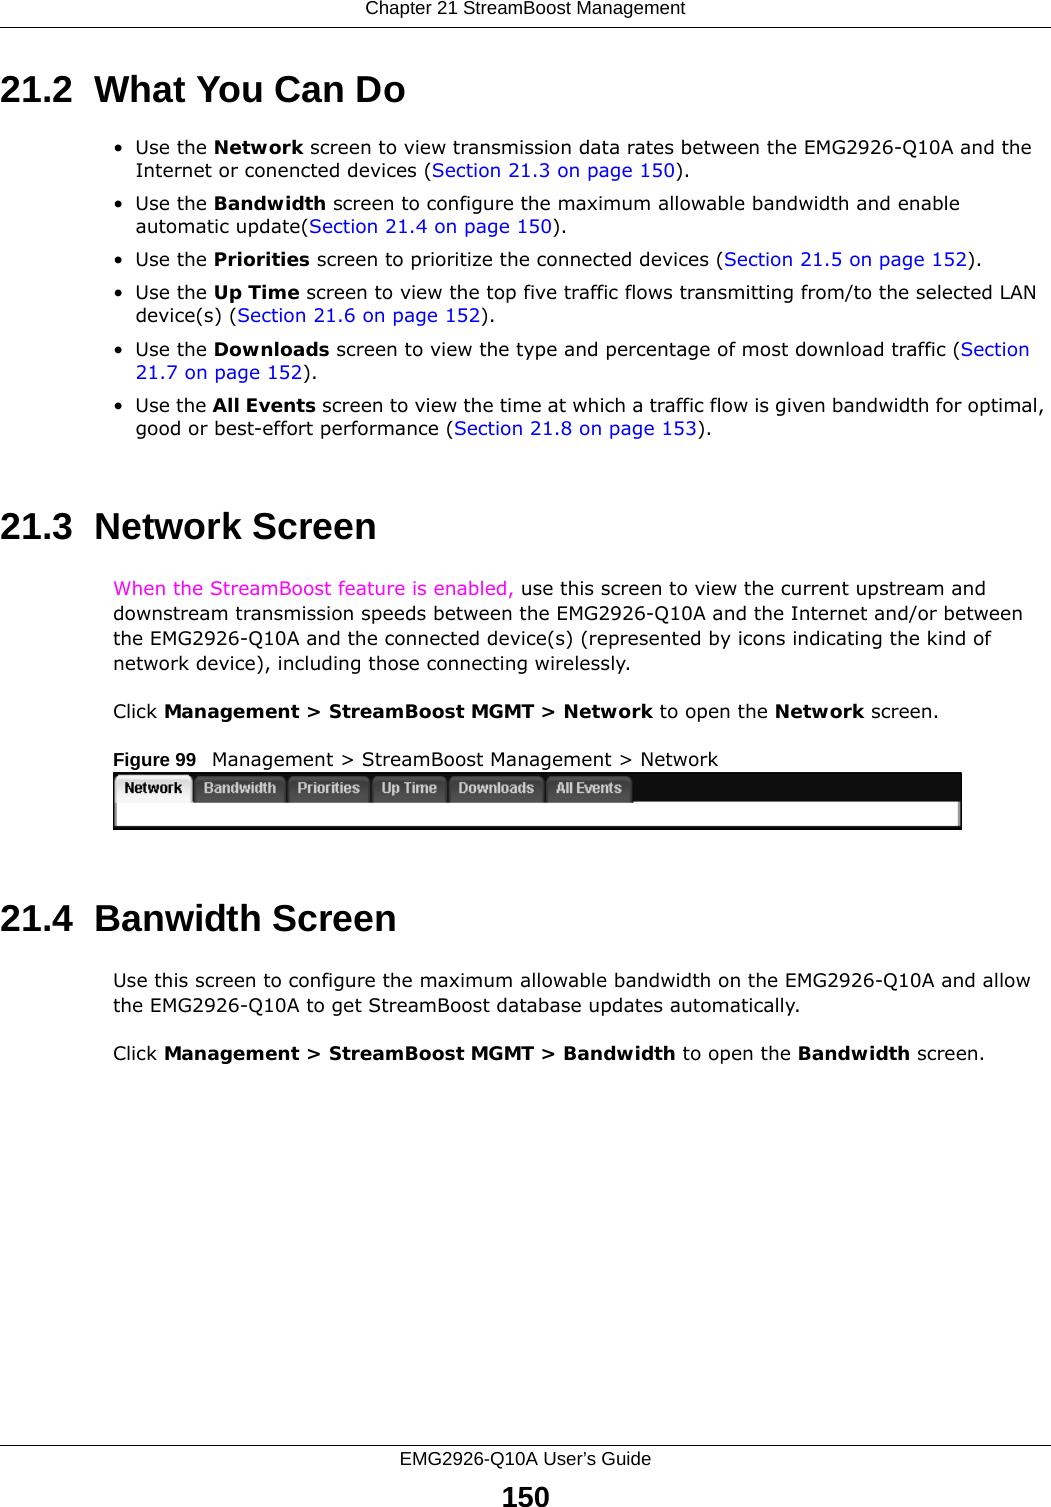 Chapter 21 StreamBoost ManagementEMG2926-Q10A User’s Guide15021.2  What You Can Do•Use the Network screen to view transmission data rates between the EMG2926-Q10A and the Internet or conencted devices (Section 21.3 on page 150).•Use the Bandwidth screen to configure the maximum allowable bandwidth and enable automatic update(Section 21.4 on page 150).•Use the Priorities screen to prioritize the connected devices (Section 21.5 on page 152).•Use the Up Time screen to view the top five traffic flows transmitting from/to the selected LAN device(s) (Section 21.6 on page 152).•Use the Downloads screen to view the type and percentage of most download traffic (Section 21.7 on page 152).•Use the All Events screen to view the time at which a traffic flow is given bandwidth for optimal, good or best-effort performance (Section 21.8 on page 153).21.3  Network Screen When the StreamBoost feature is enabled, use this screen to view the current upstream and downstream transmission speeds between the EMG2926-Q10A and the Internet and/or between the EMG2926-Q10A and the connected device(s) (represented by icons indicating the kind of network device), including those connecting wirelessly.Click Management &gt; StreamBoost MGMT &gt; Network to open the Network screen.Figure 99   Management &gt; StreamBoost Management &gt; Network   21.4  Banwidth ScreenUse this screen to configure the maximum allowable bandwidth on the EMG2926-Q10A and allow the EMG2926-Q10A to get StreamBoost database updates automatically.Click Management &gt; StreamBoost MGMT &gt; Bandwidth to open the Bandwidth screen.